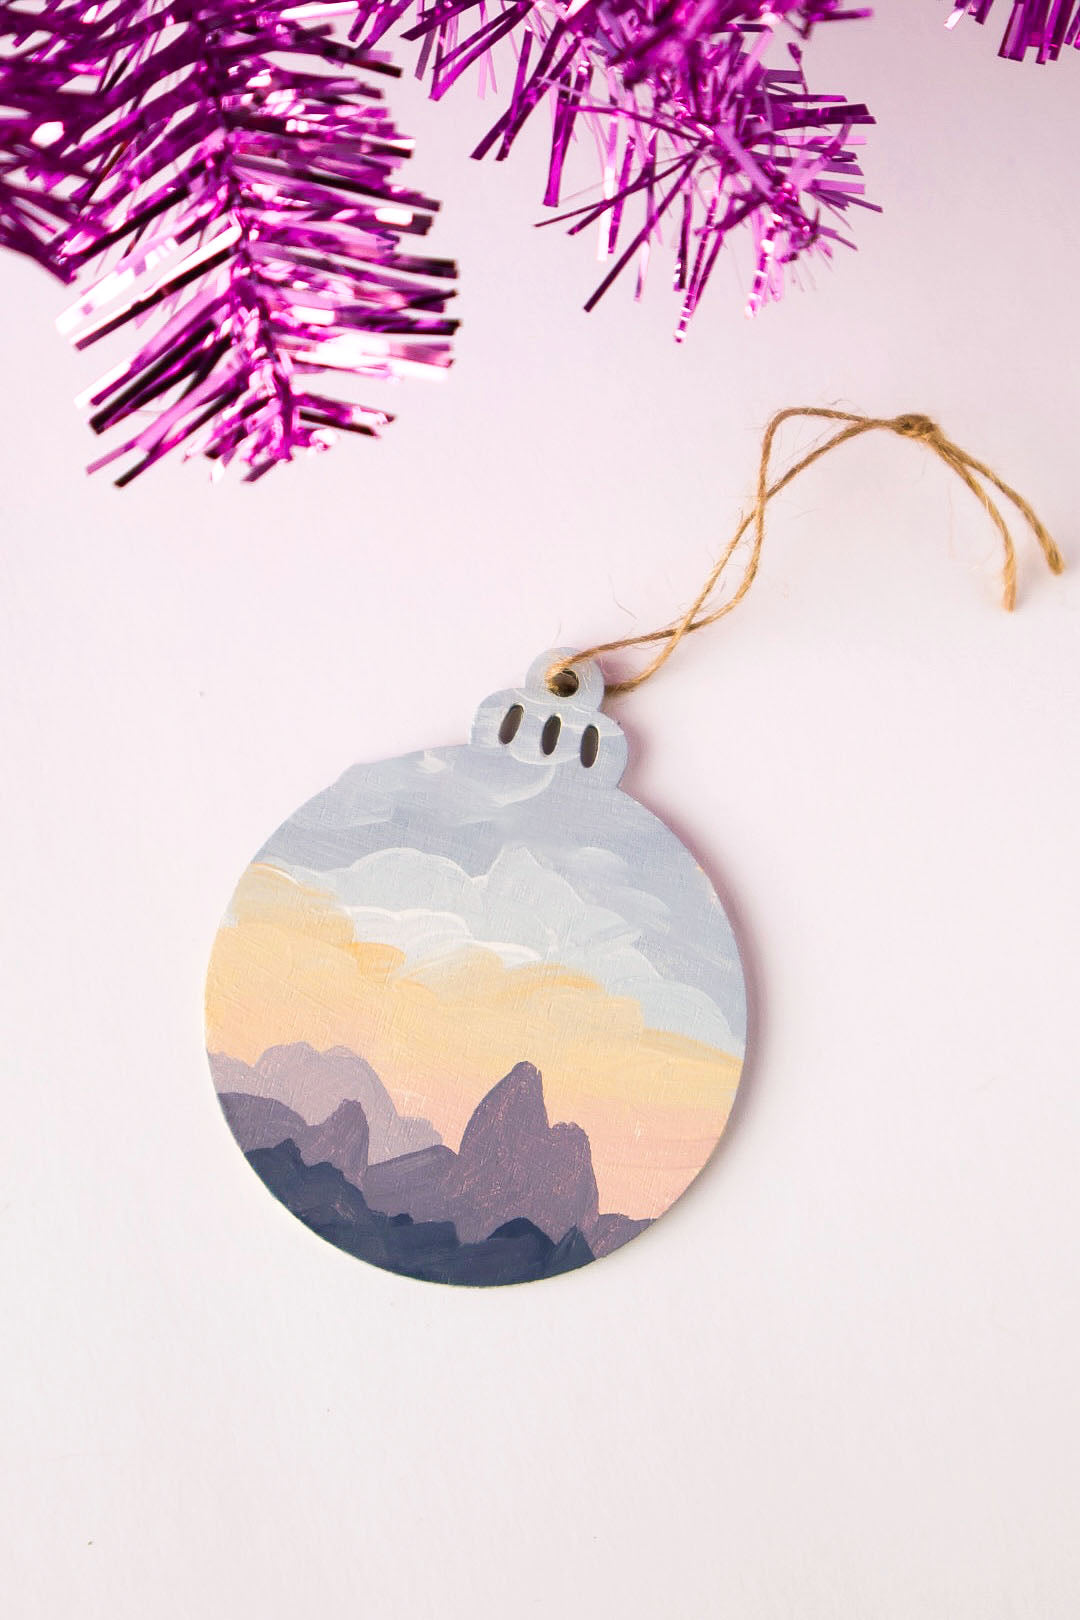 Mountain Sunset Hand Painted Ornament